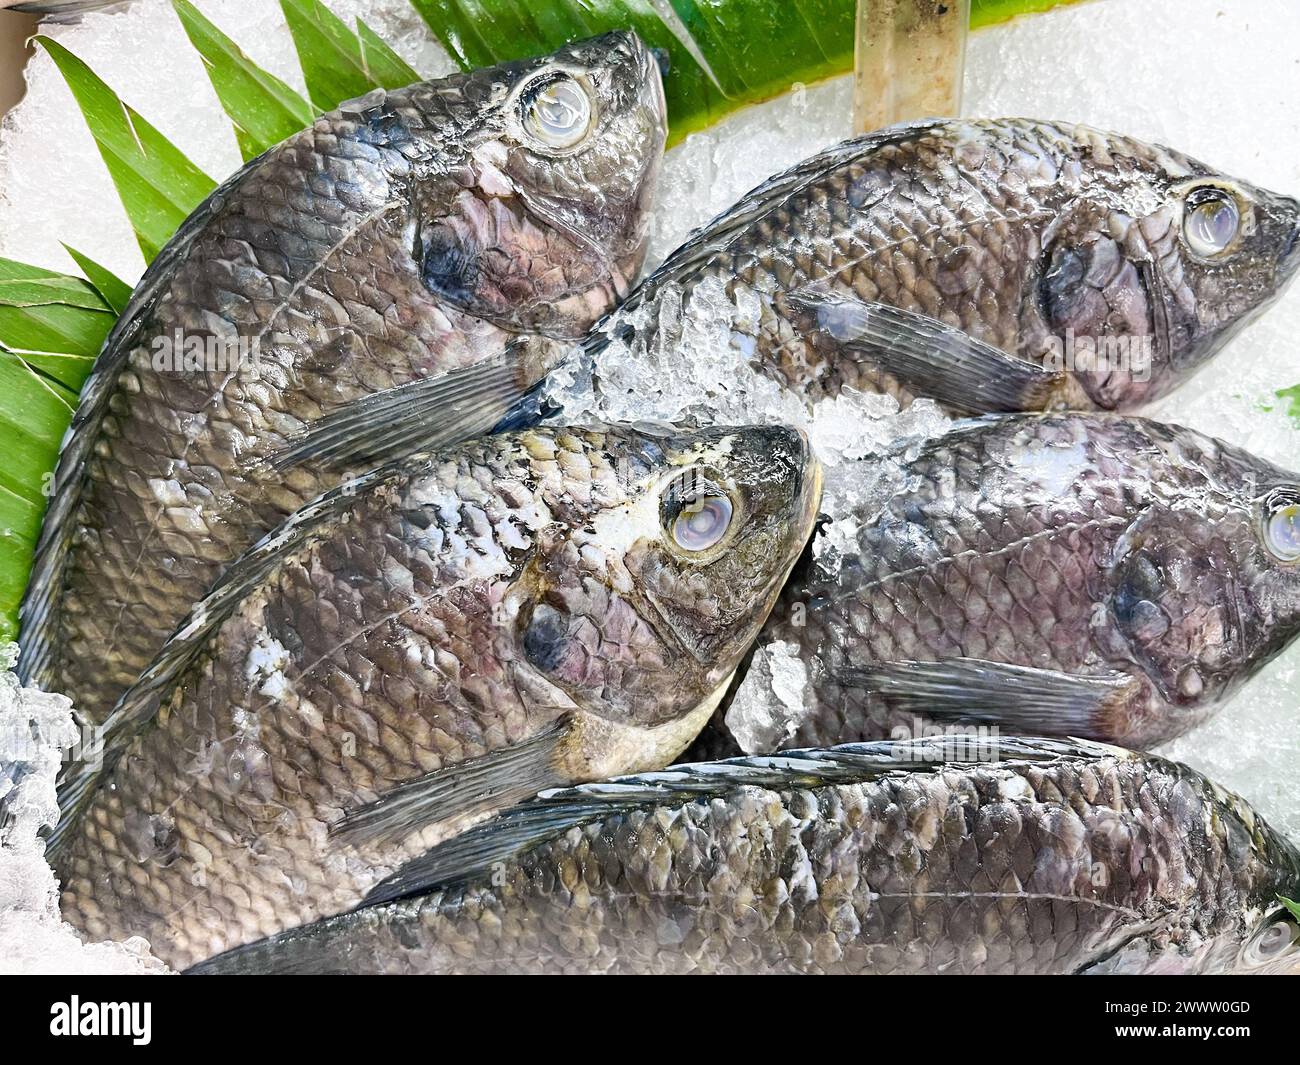 Raw tilapia fish served with ice Stock Photo